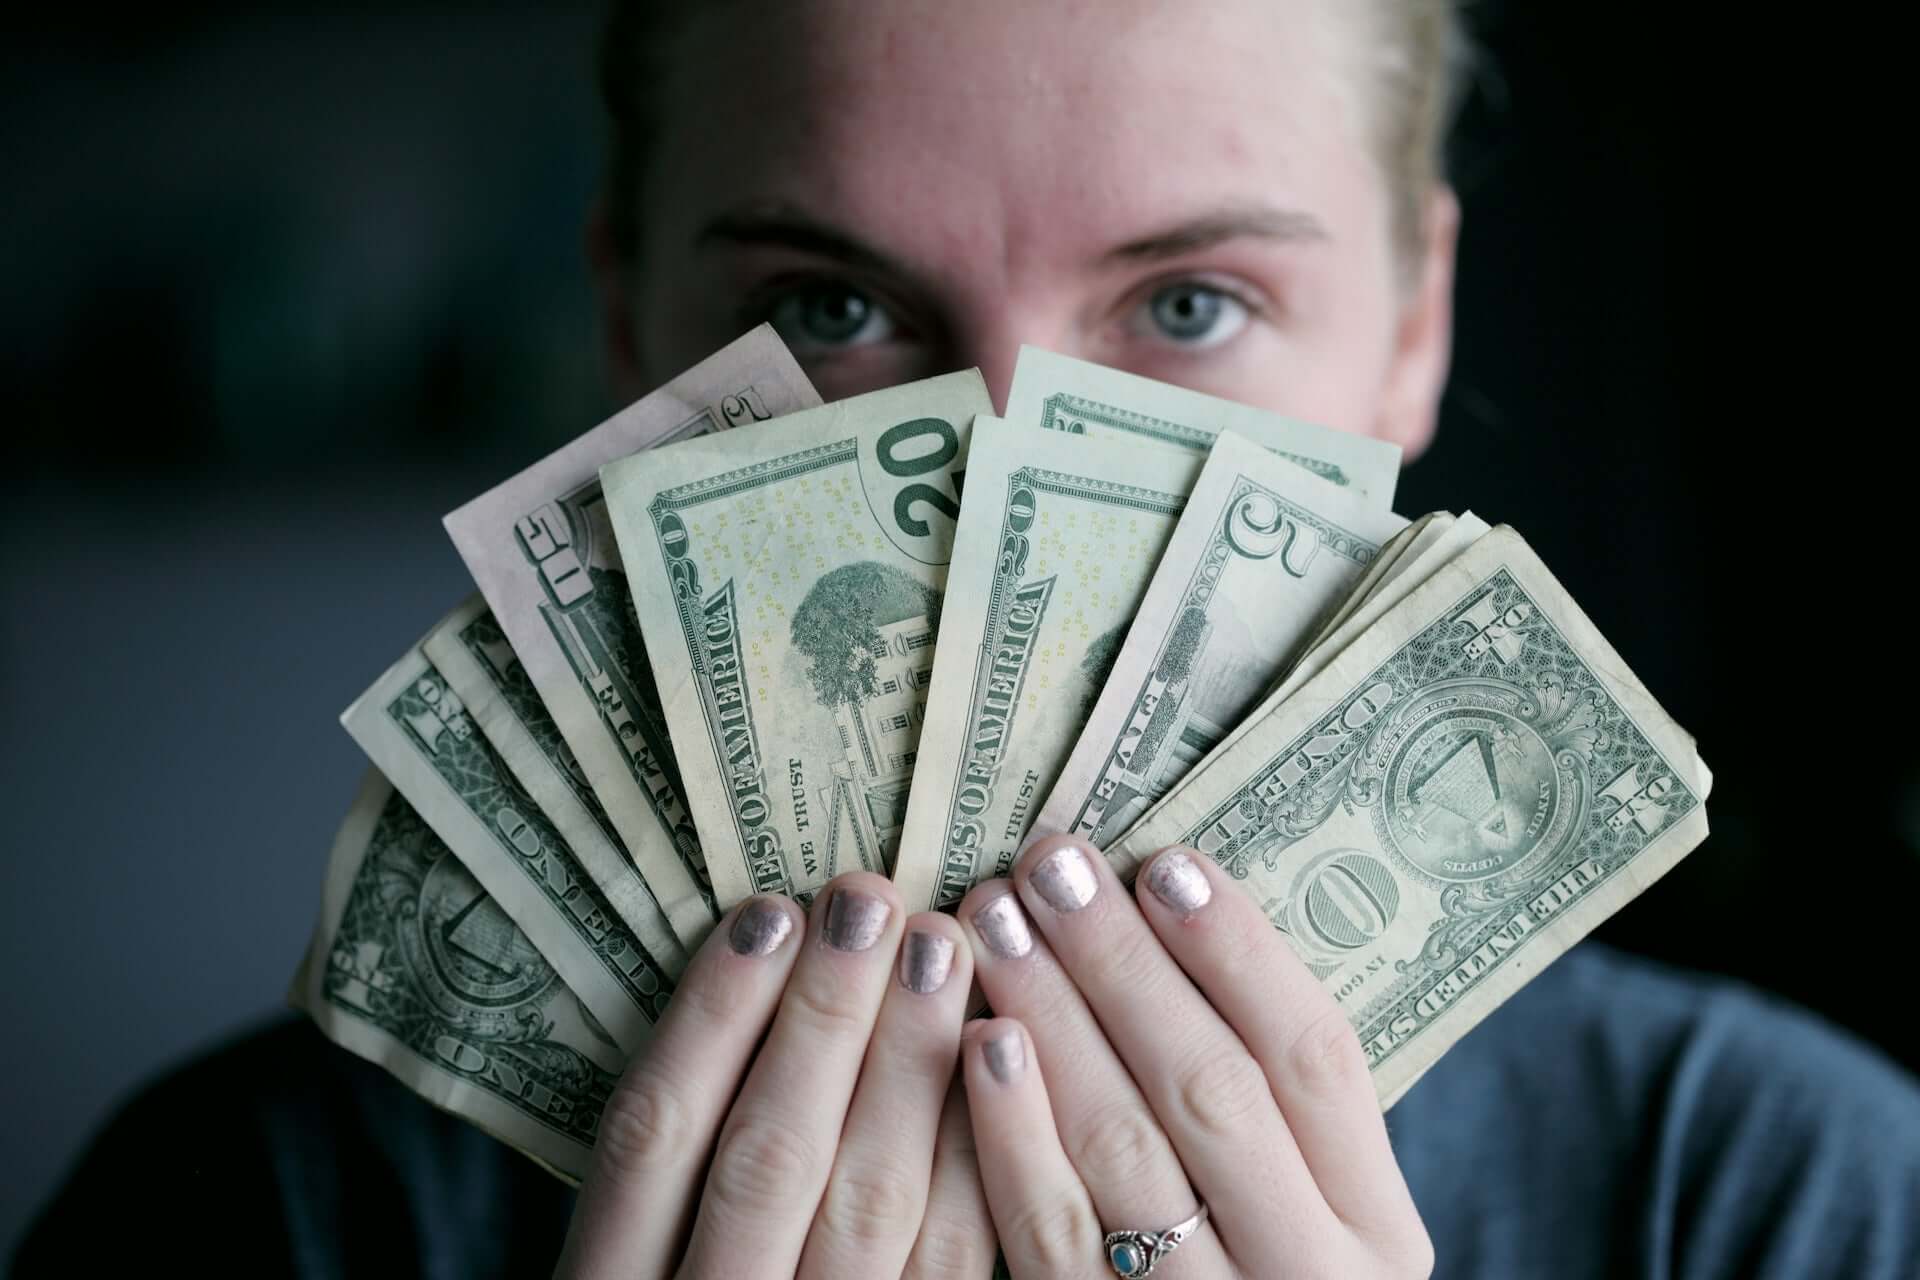 A woman fans several American dollar bills in front of her face.